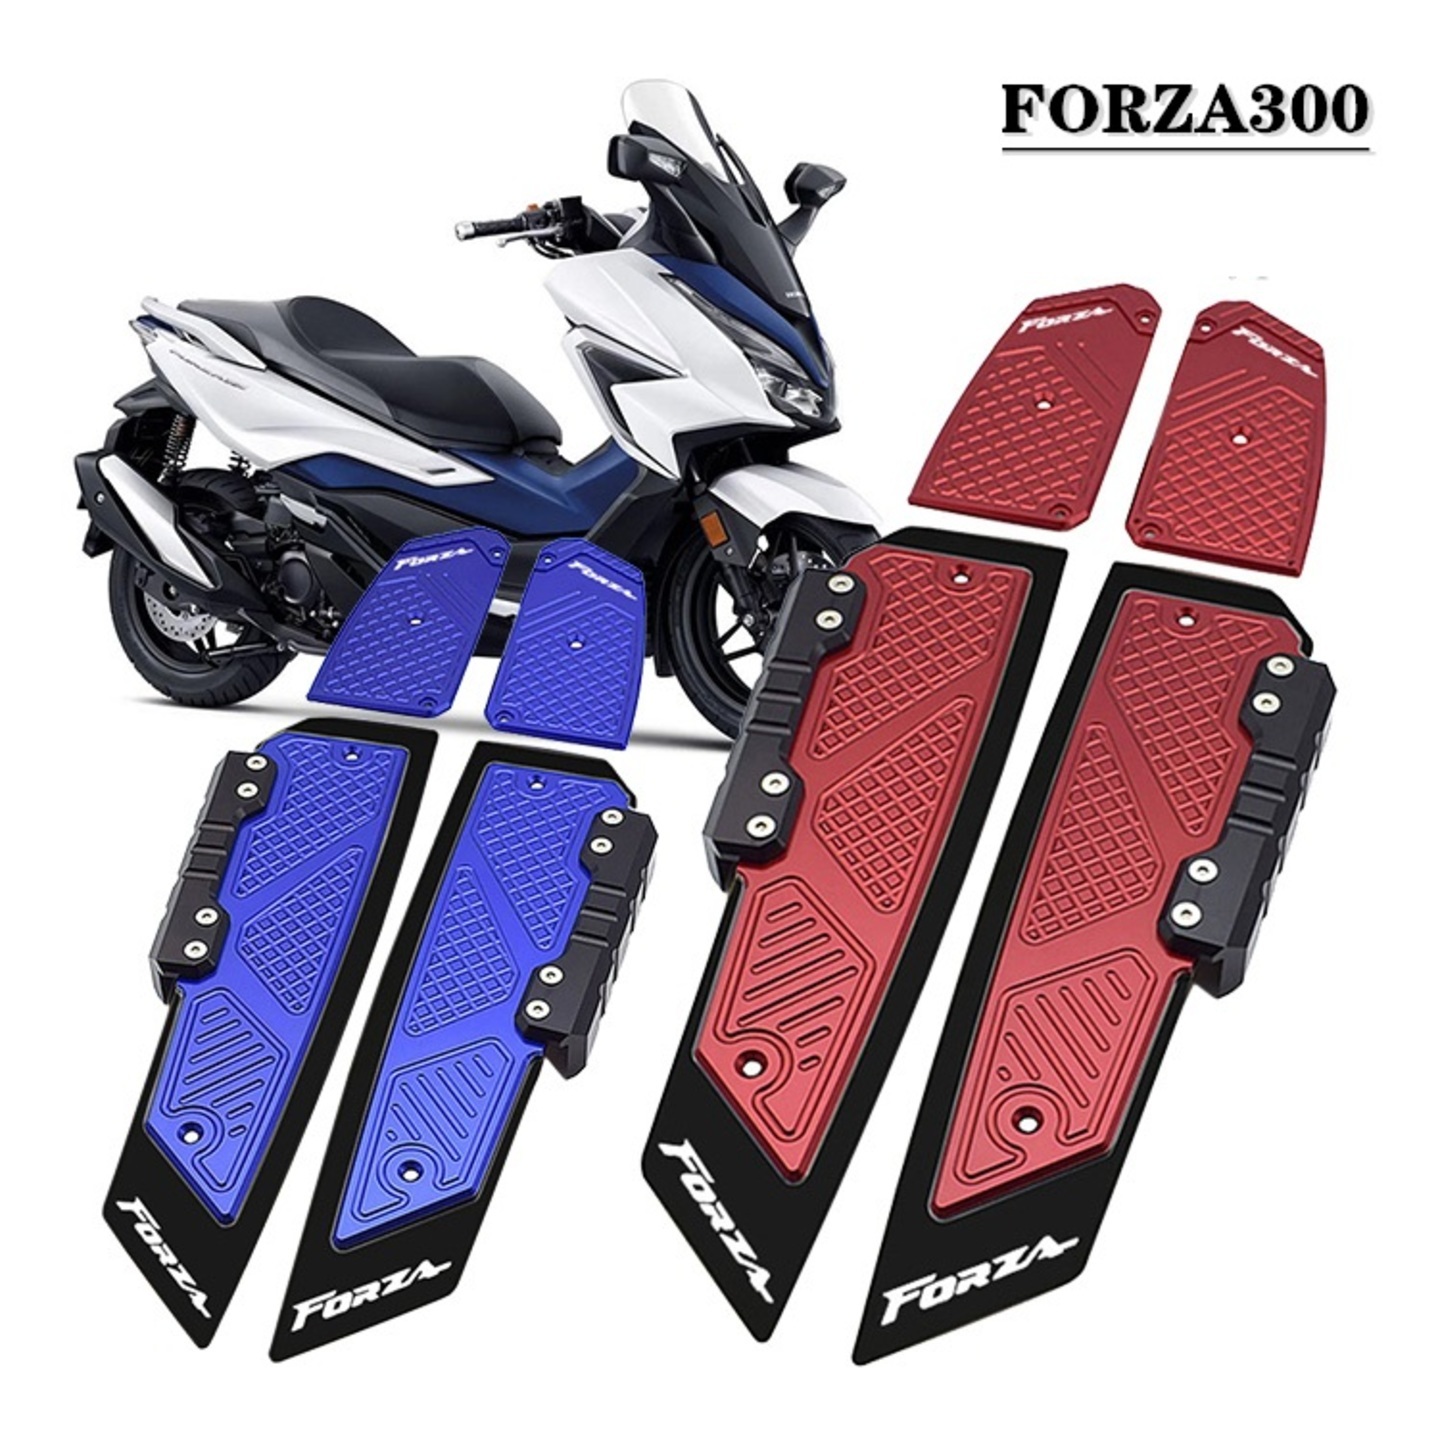 Honda Forza foot pedals rest plate